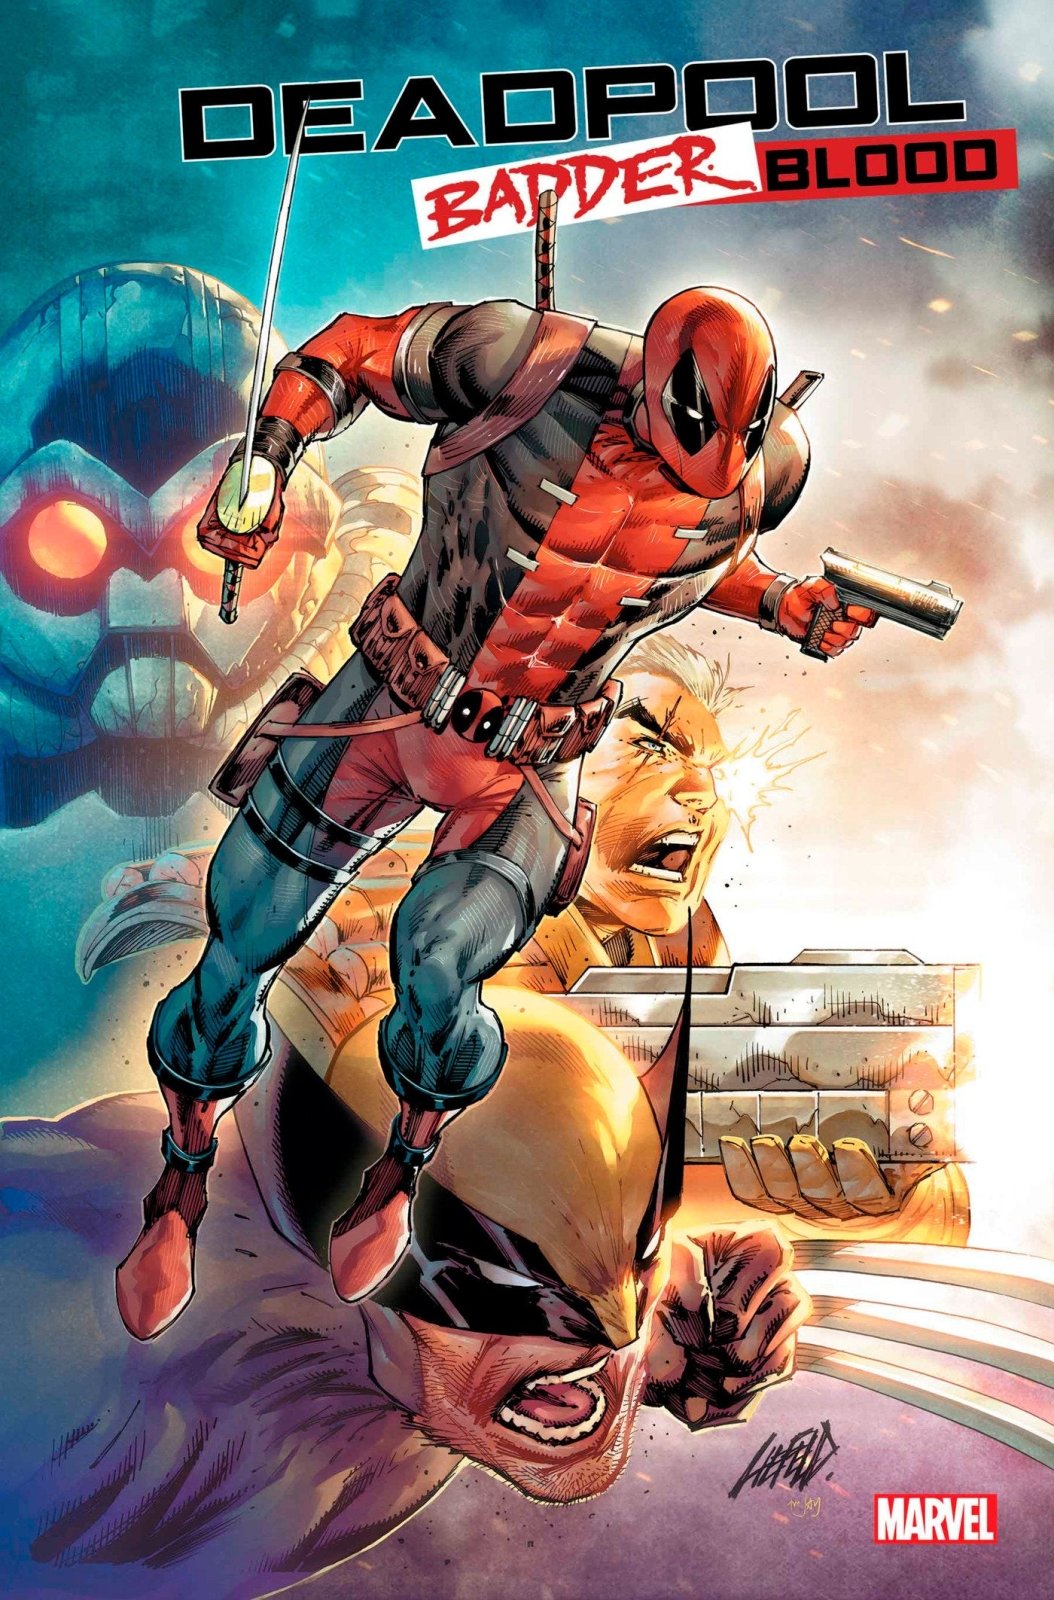 Deadpool: Badder Blood 1 - The Fourth Place